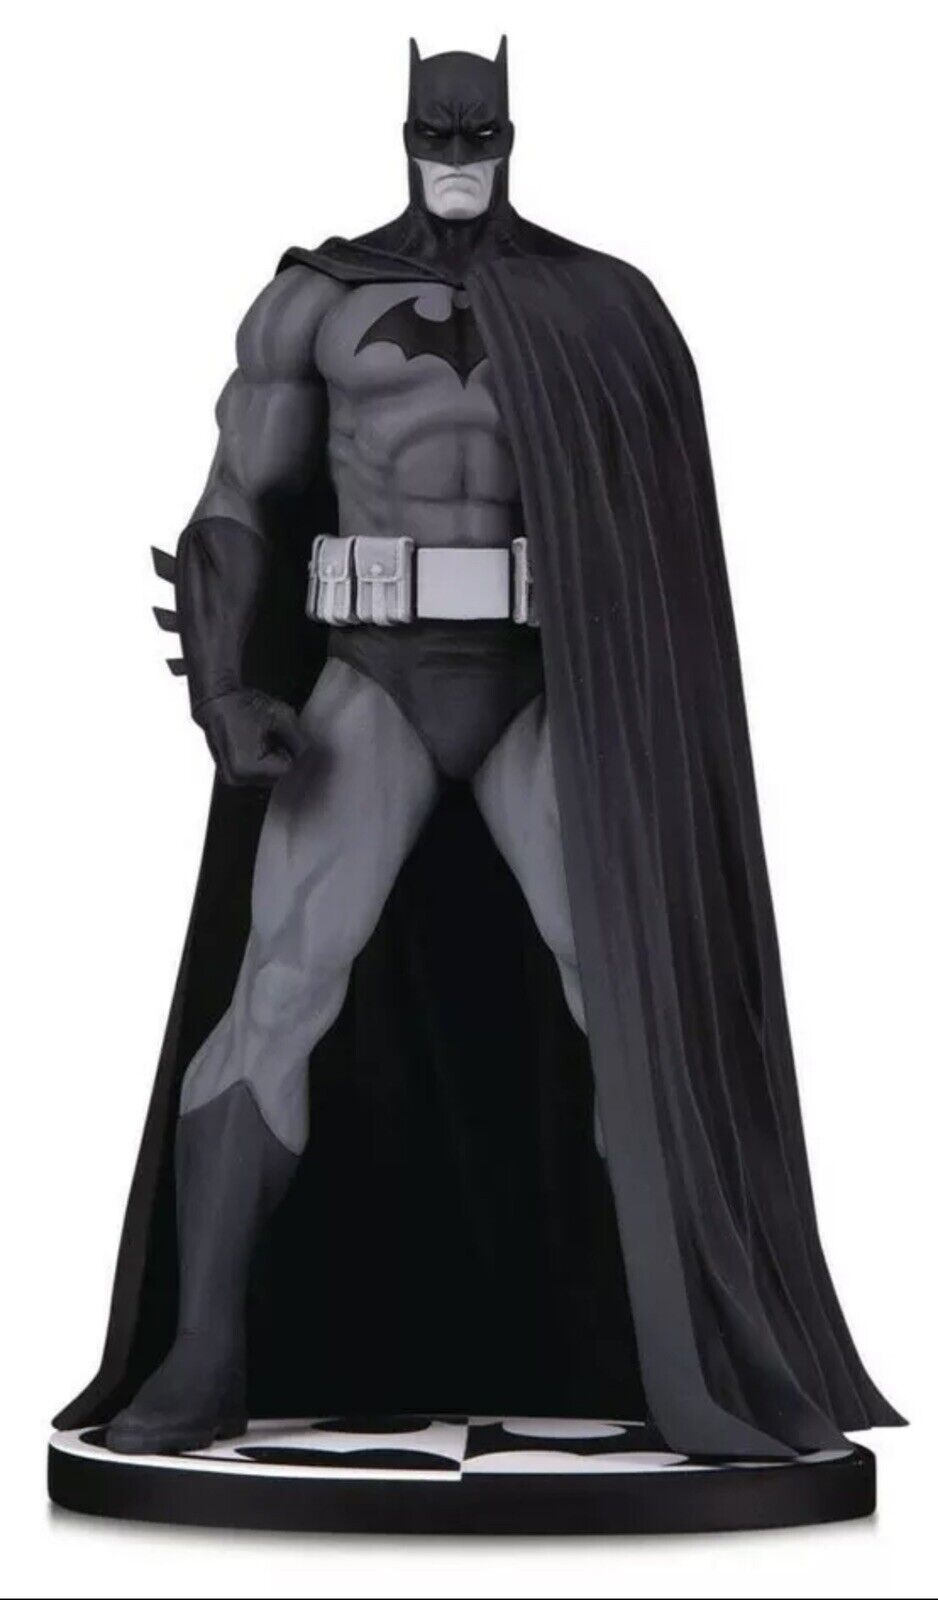 DC Collectibles Batman Black and White Statue V.3 V3 by Jim Lee In Stock SALE🎁